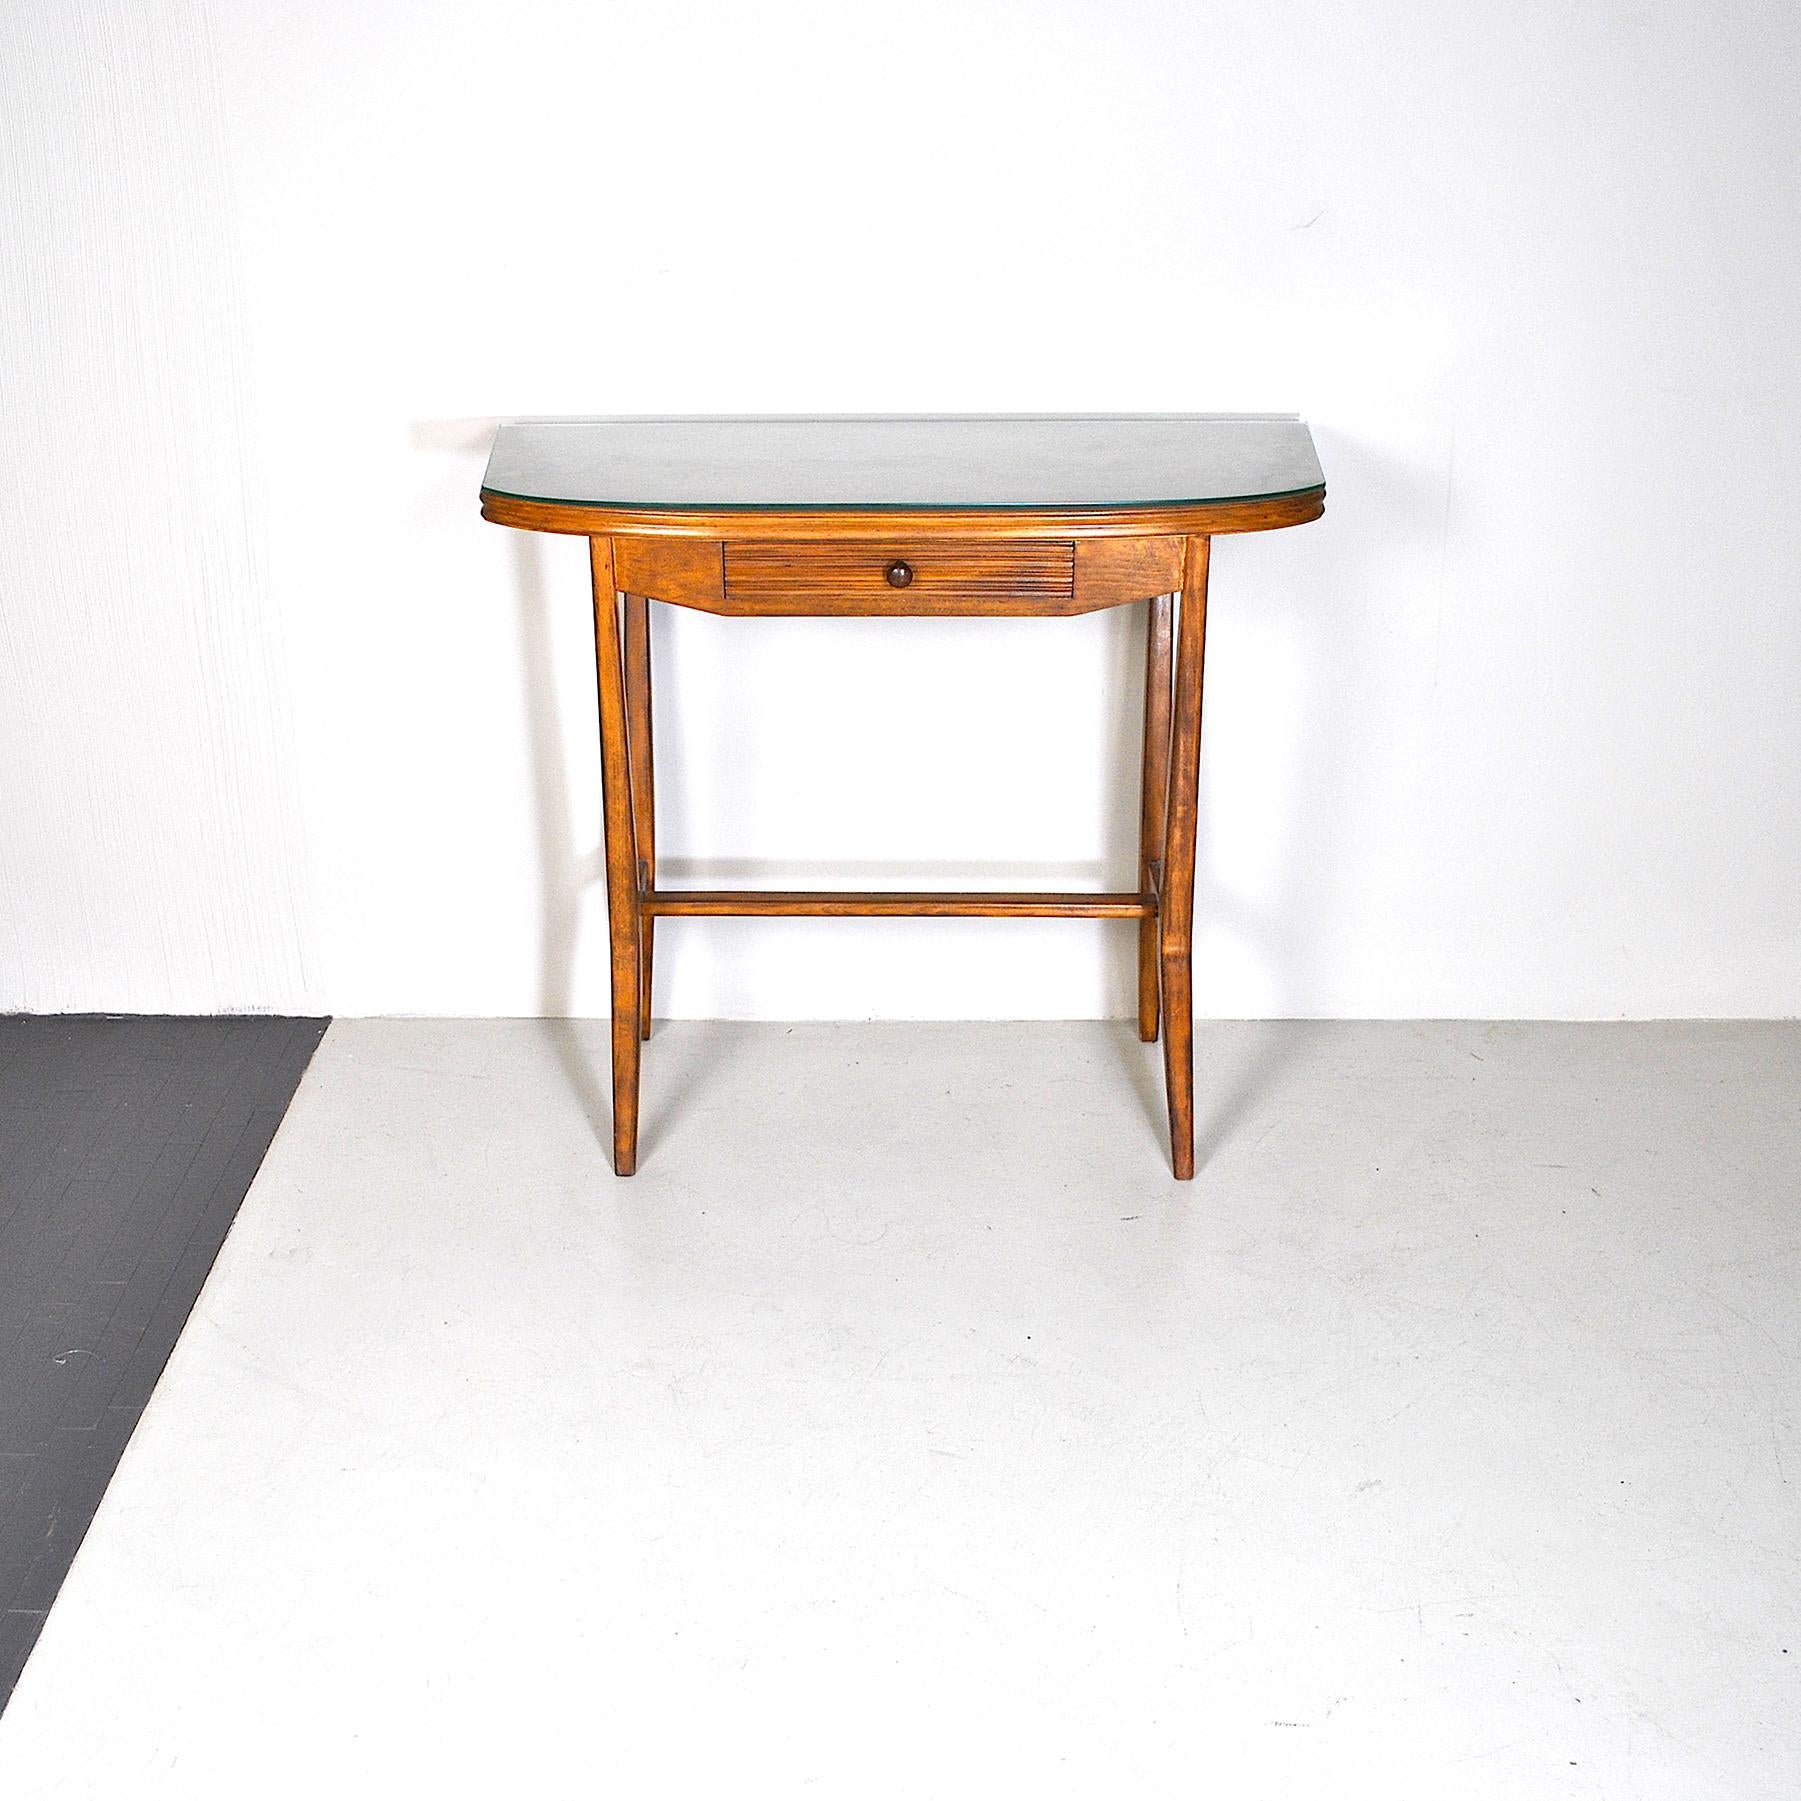 Italian midcentury console 1950s with a glass on top and a little puller.